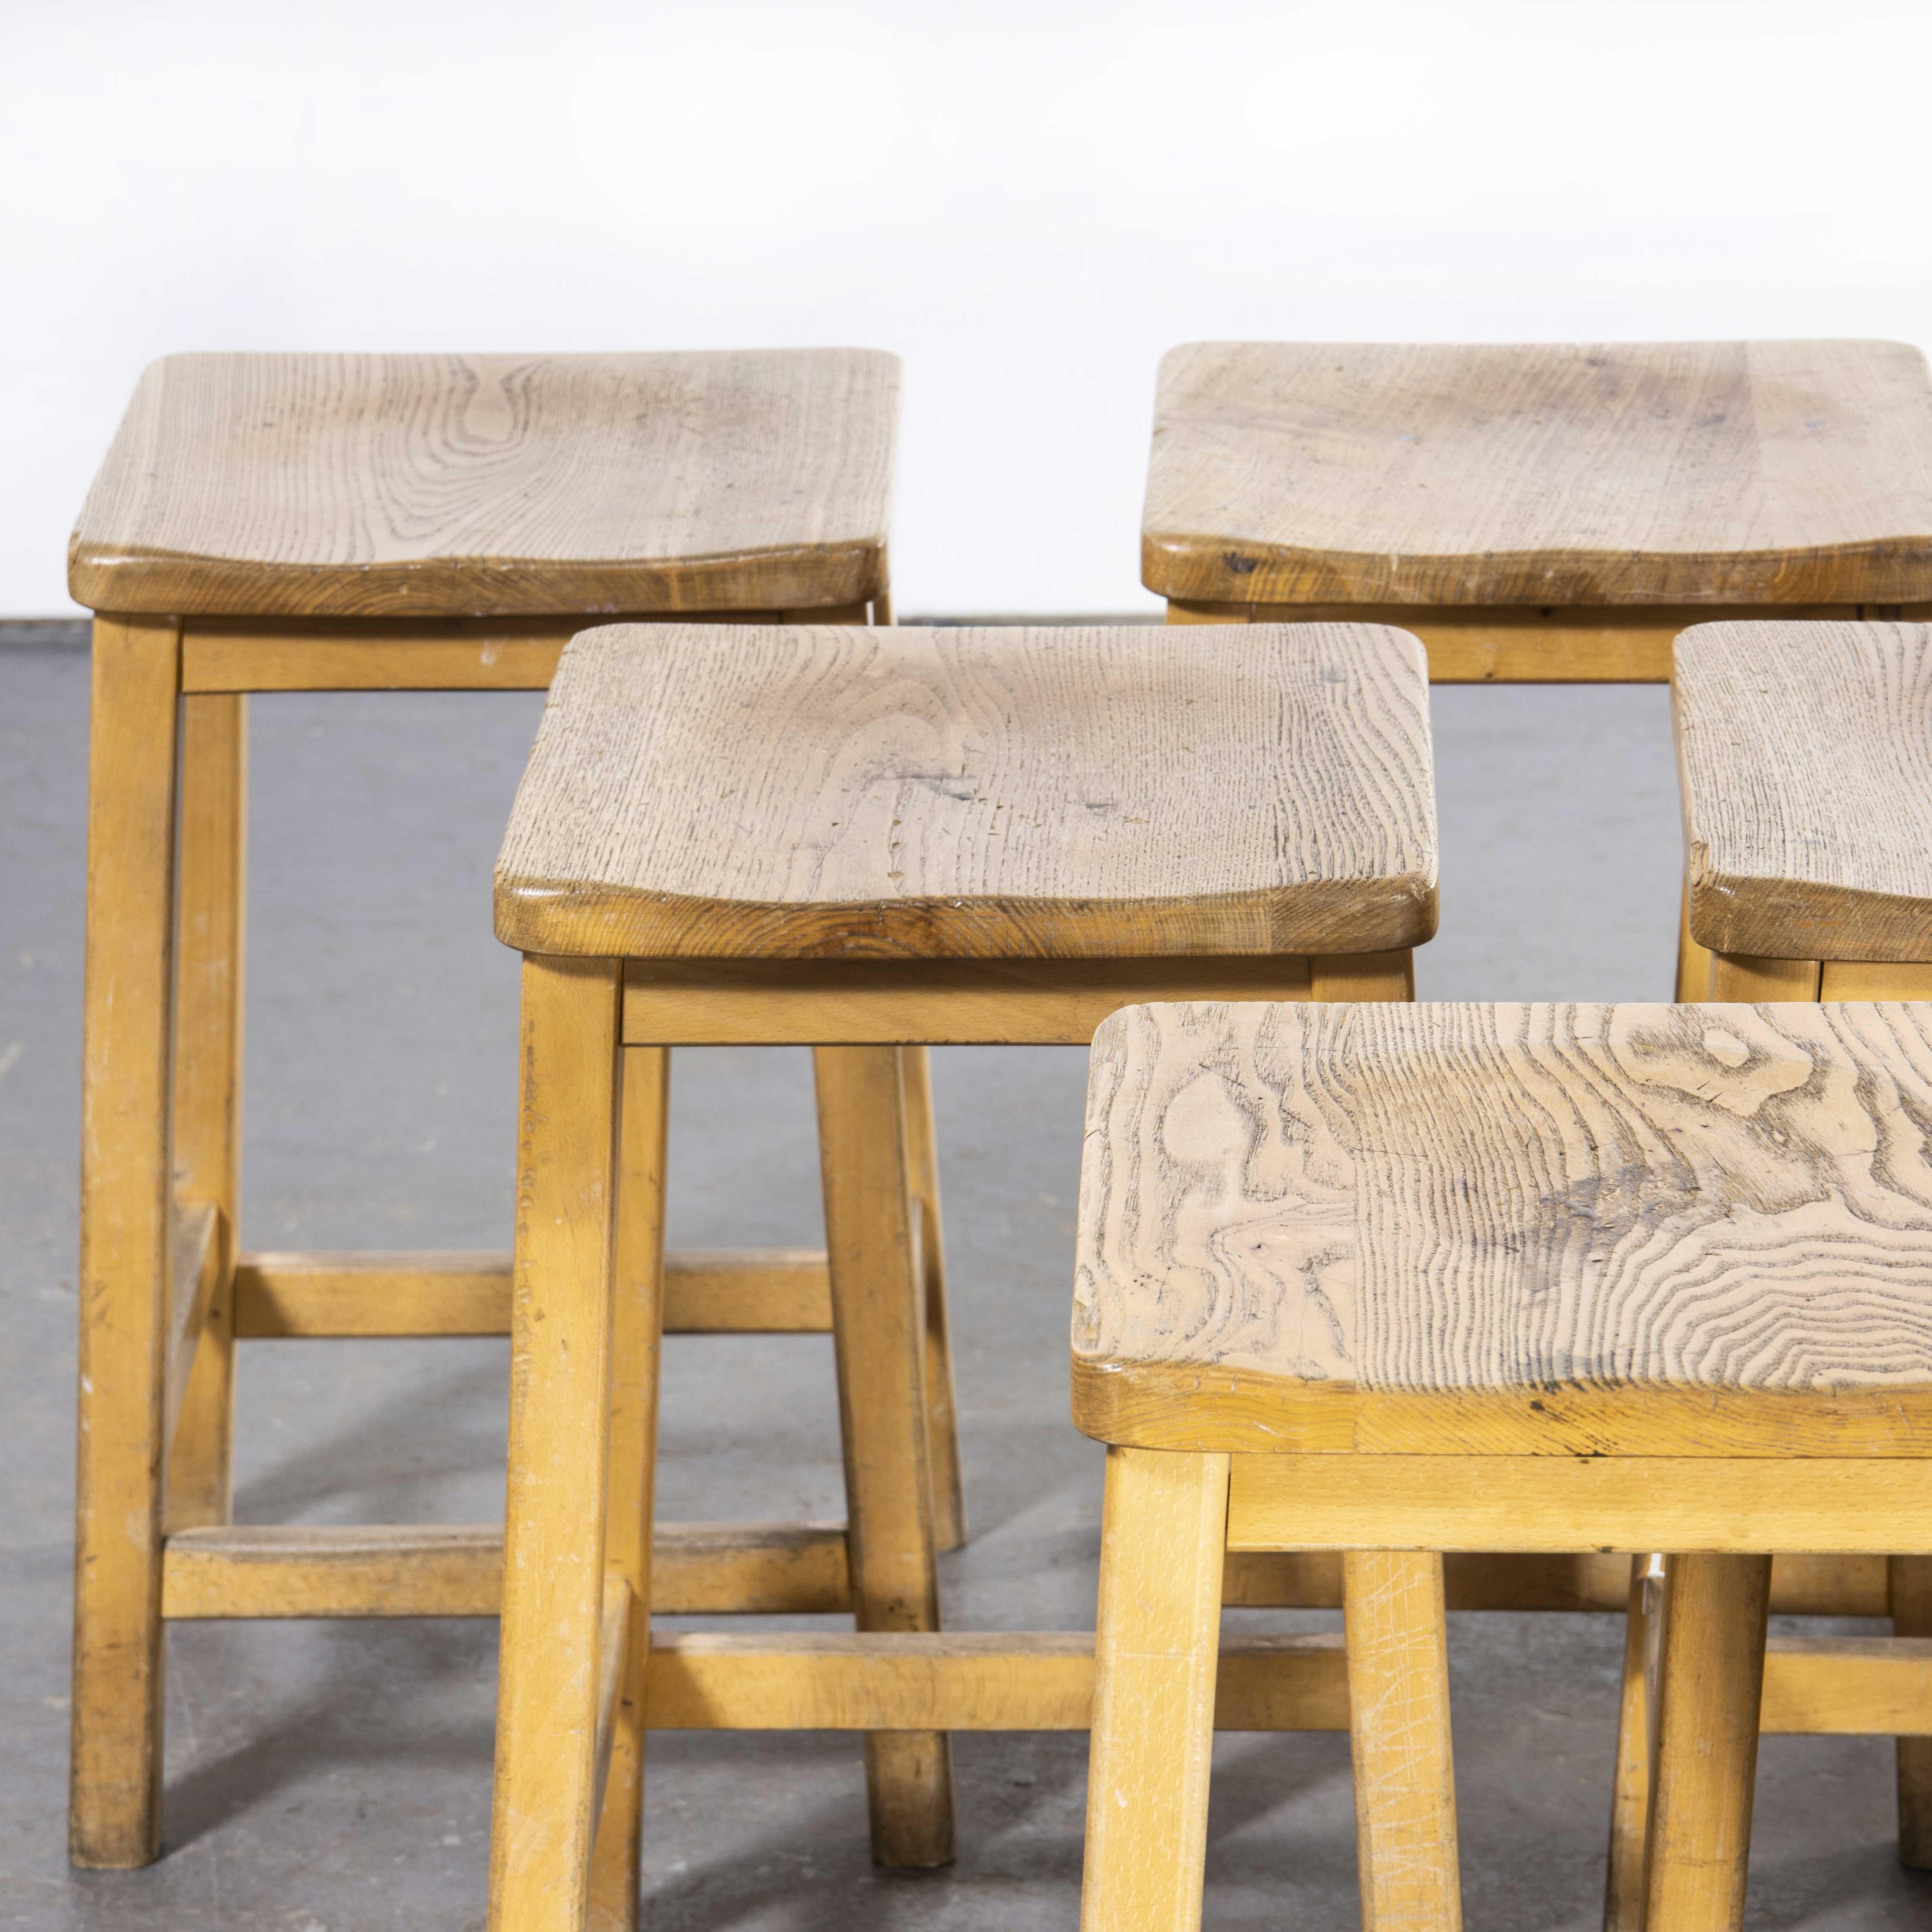 1950’s English oak school laboratory stools – set of eight

1950’s English oak school laboratory stools – Eight. For most British students these stools will be very familiar as they graced many a science laboratory or art school throughout the UK.